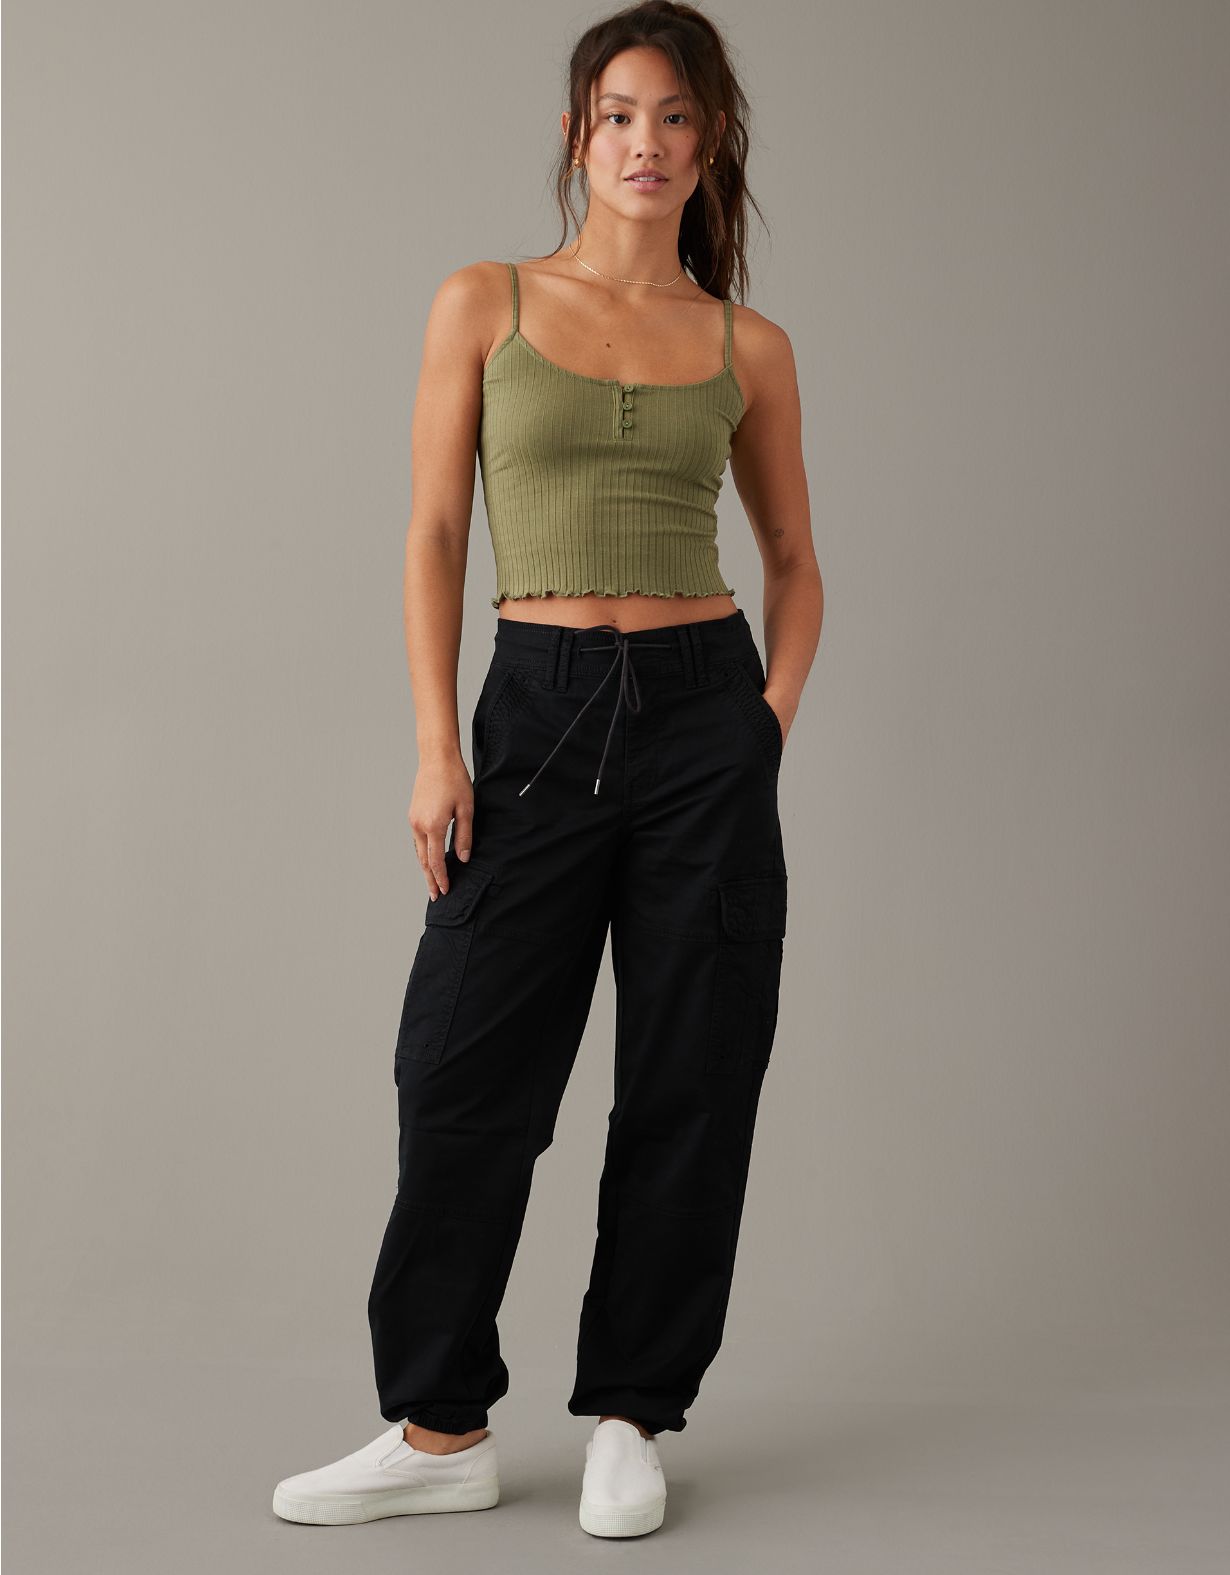 AE Baggy Jogger